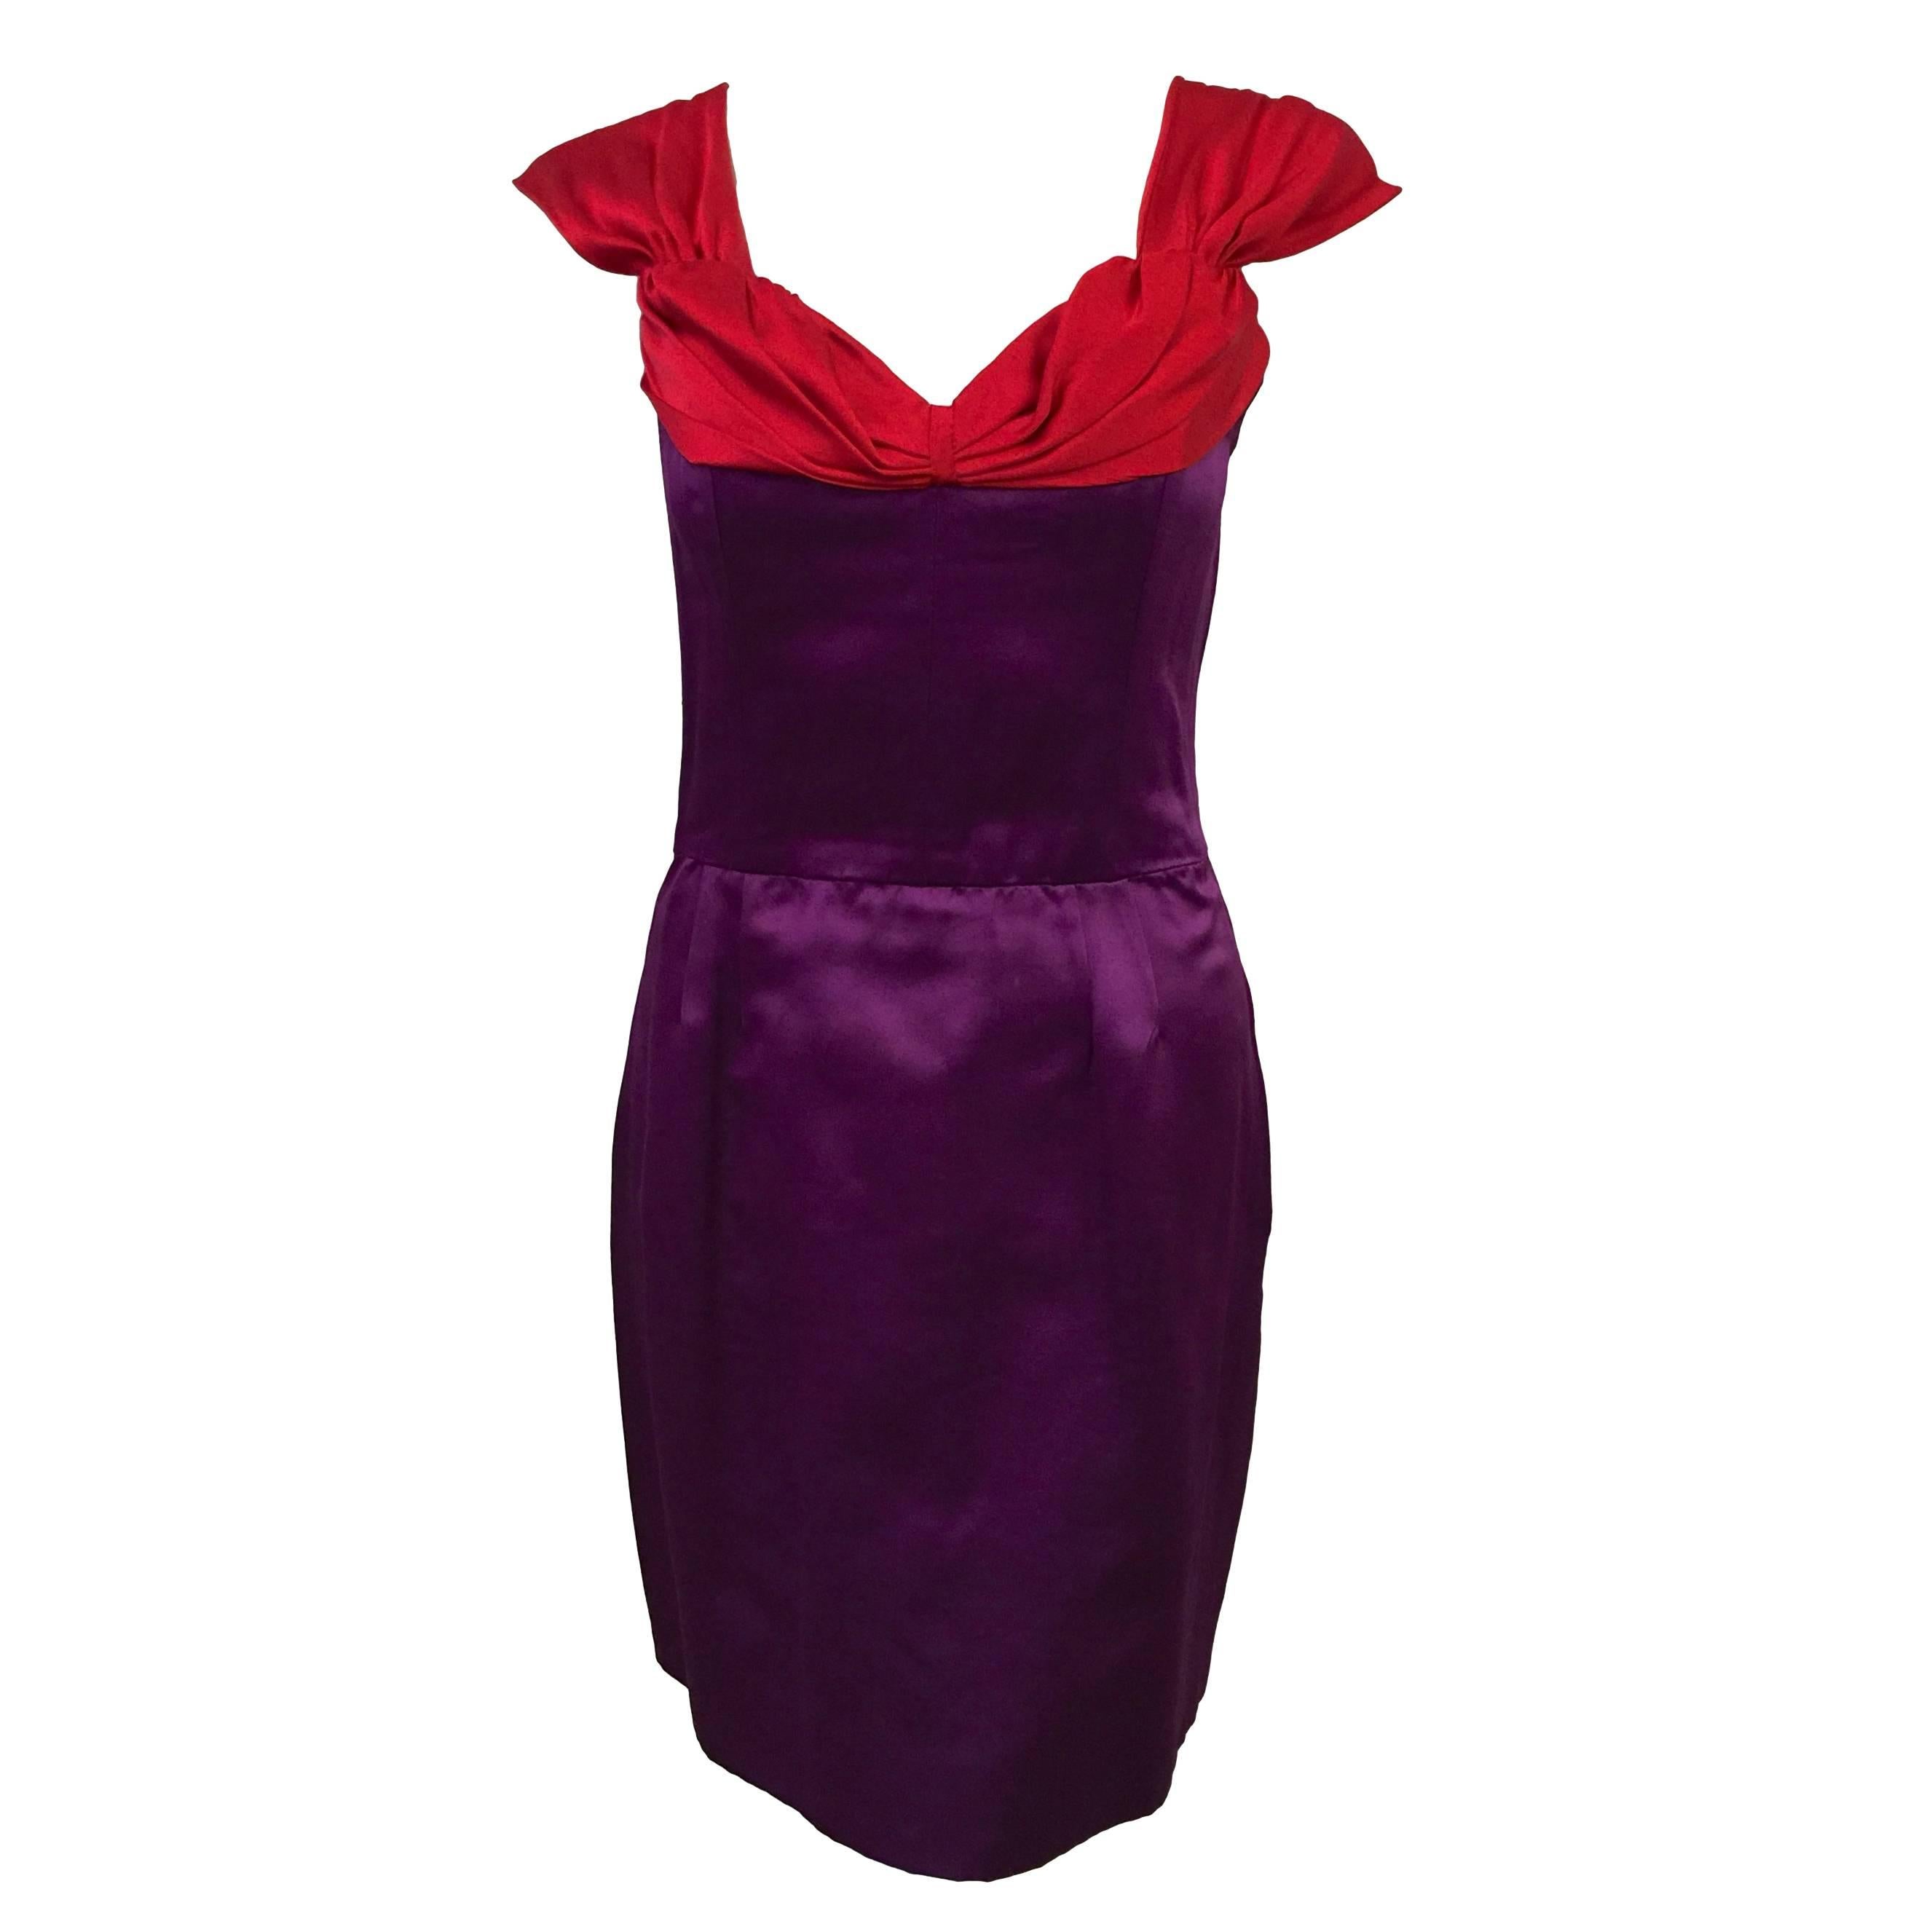 1990s Lanvin Electric Aubergine and Berry Silk Satin Cap Sleeve Cocktail Dress  For Sale